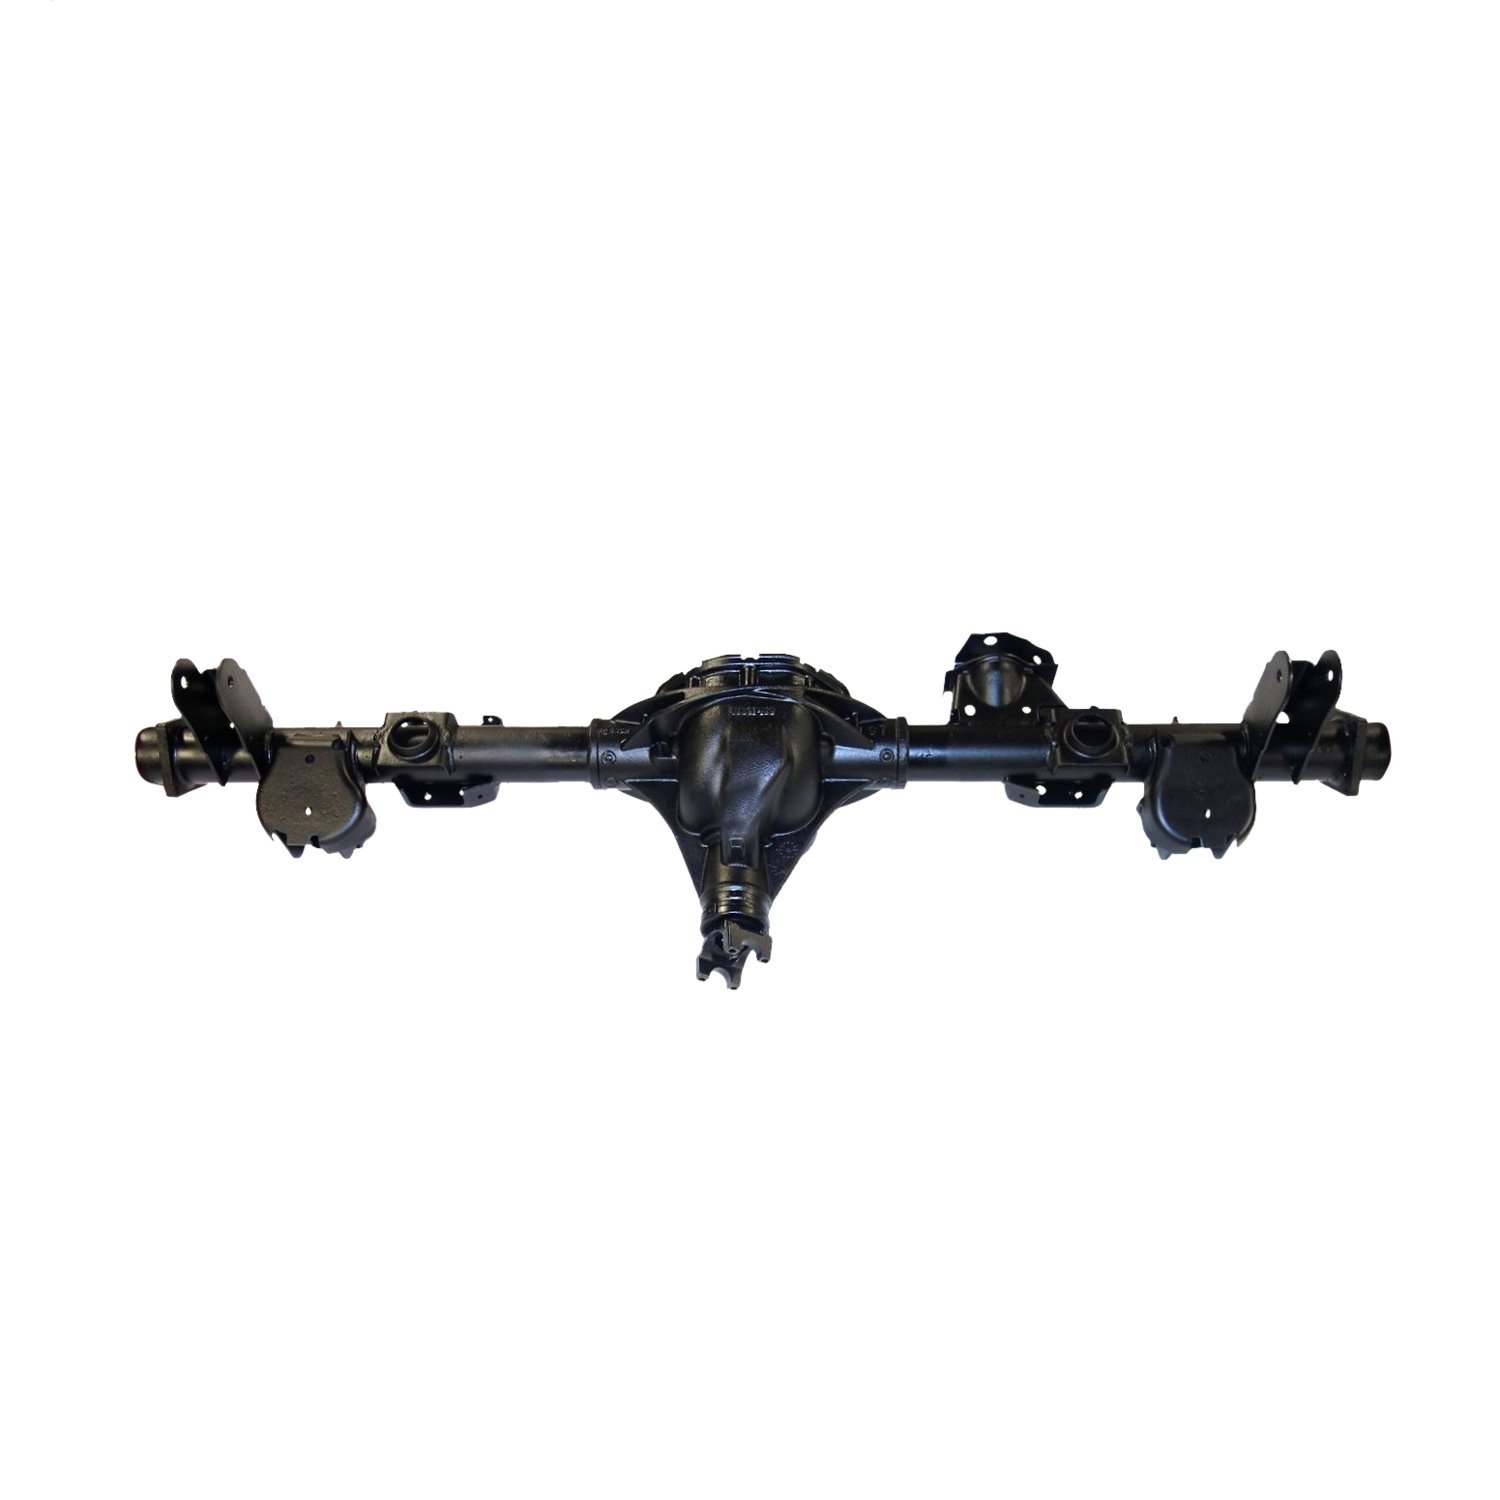 Remanufactured Axle Assembly for GM 8.6" 2007-08 GM Suburban 1500, 3.73 Rato, Open